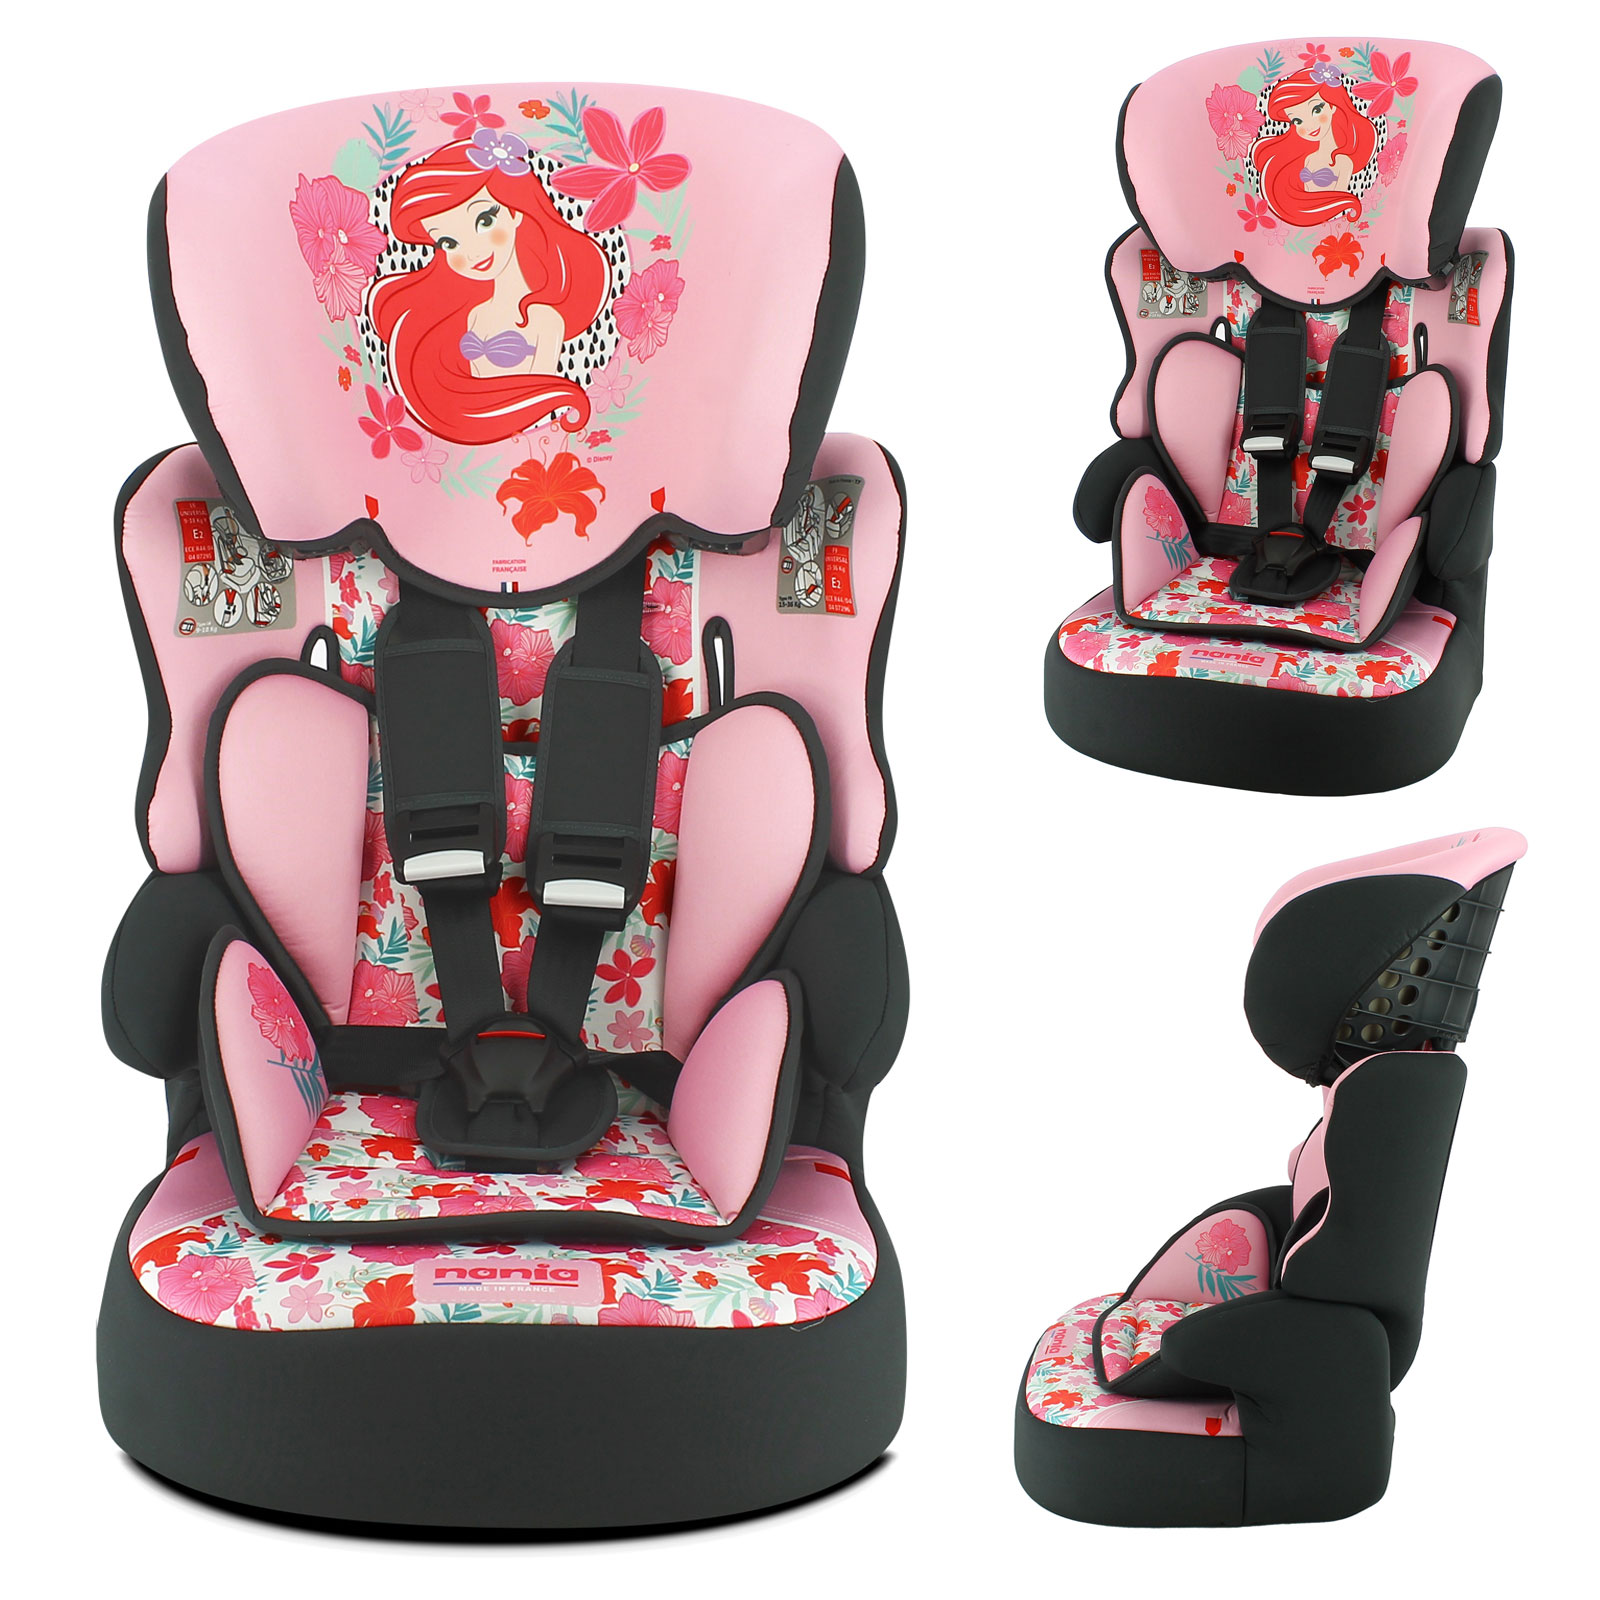 Little Mermaid Linton Comfort Plus Luxe Group 1/2/3 Car Seat - Pink (9 Months-12 Years)